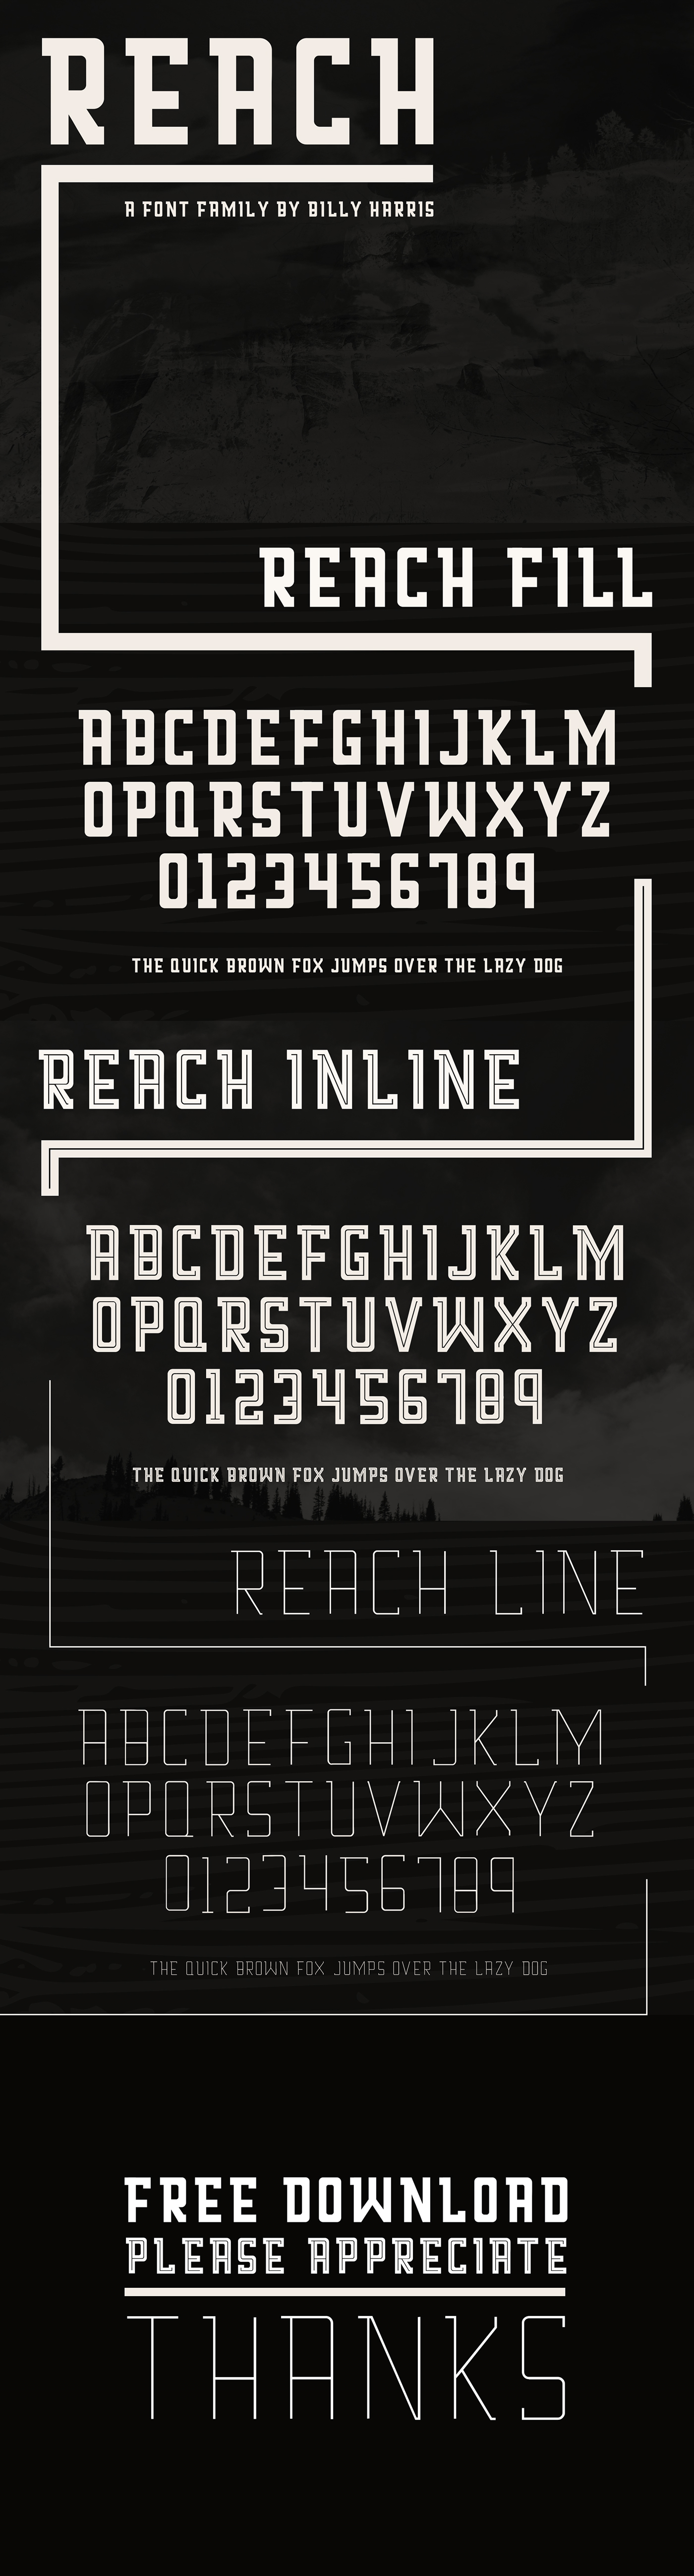 font free download Typeface family freeware Free font free typeface